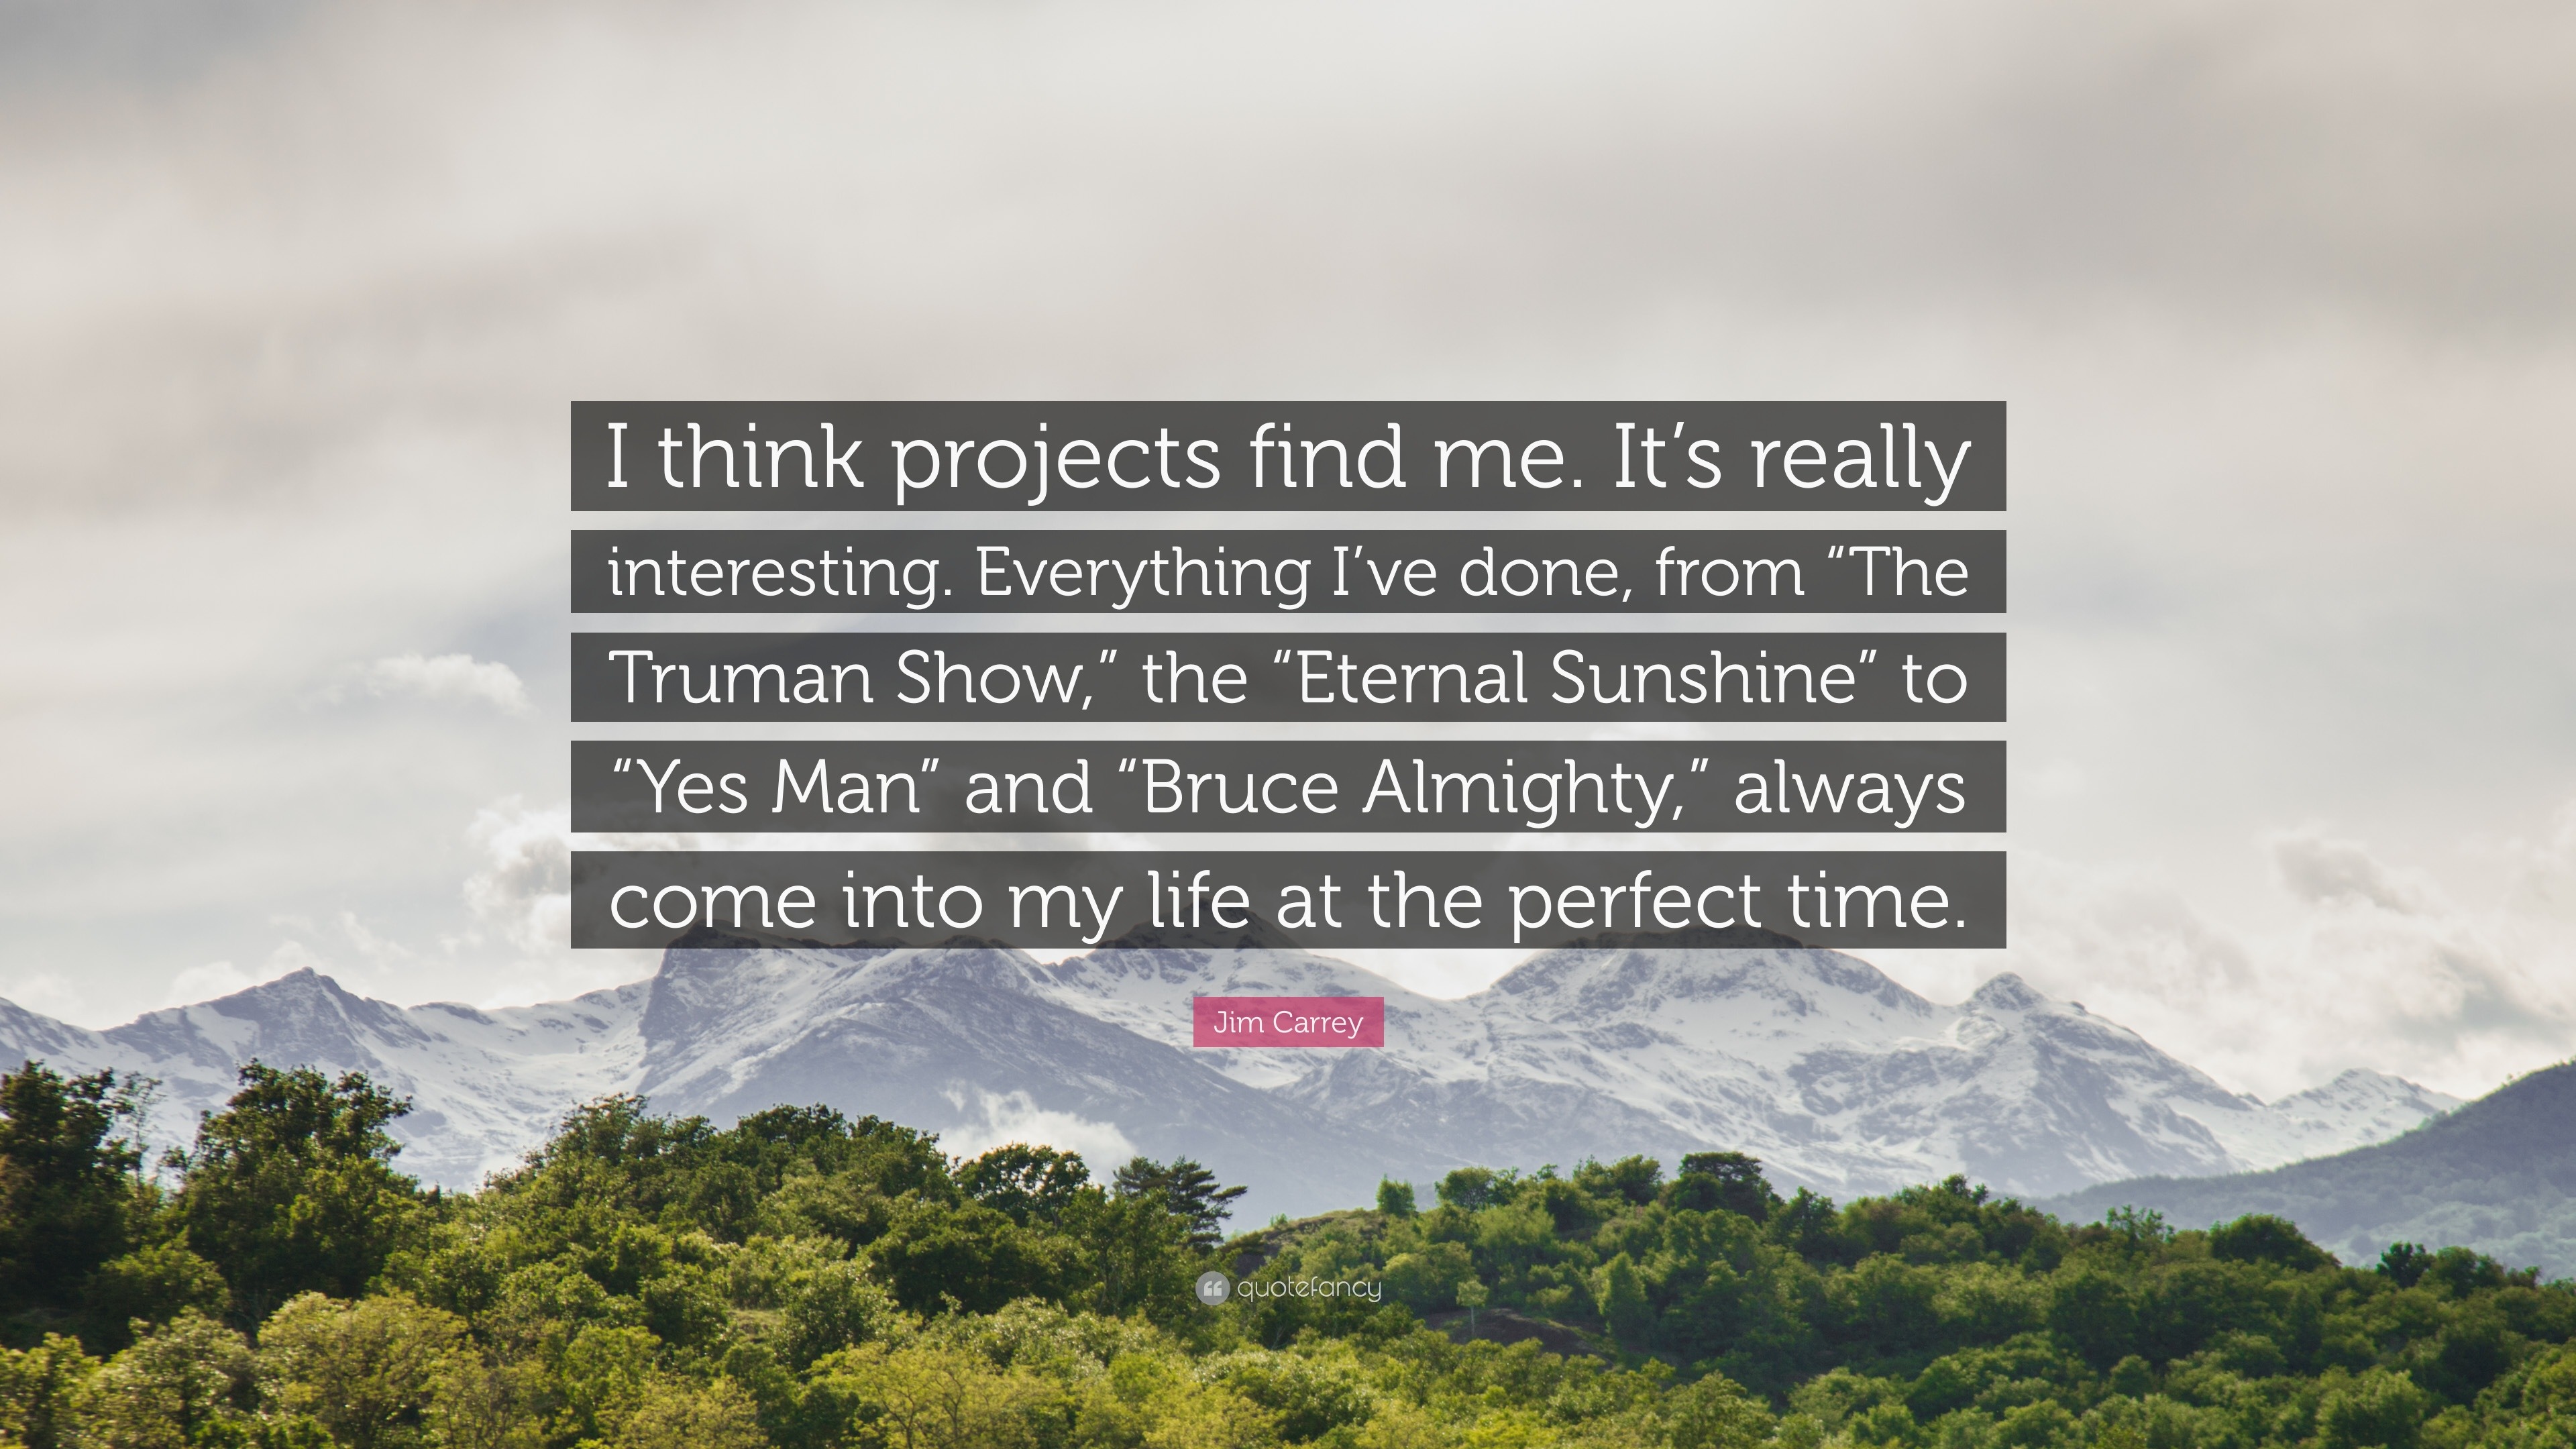 Jim Carrey Quote I Think Projects Find Me It S Really Interesting Everything I Ve Done From The Truman Show The Eternal Sunshine